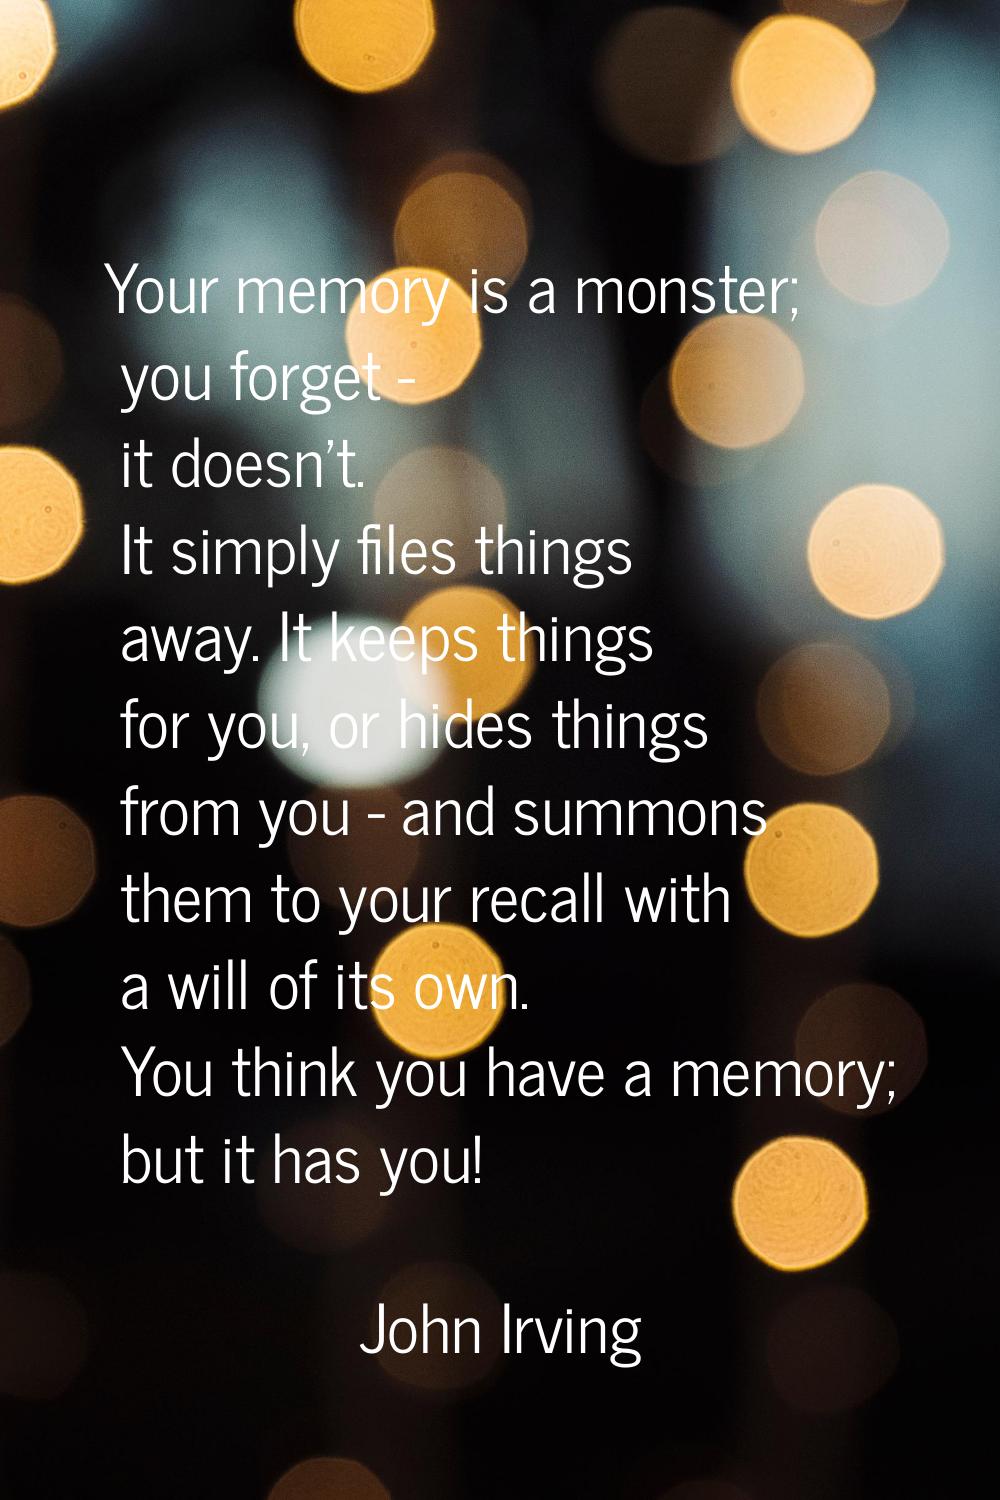 Your memory is a monster; you forget - it doesn't. It simply files things away. It keeps things for